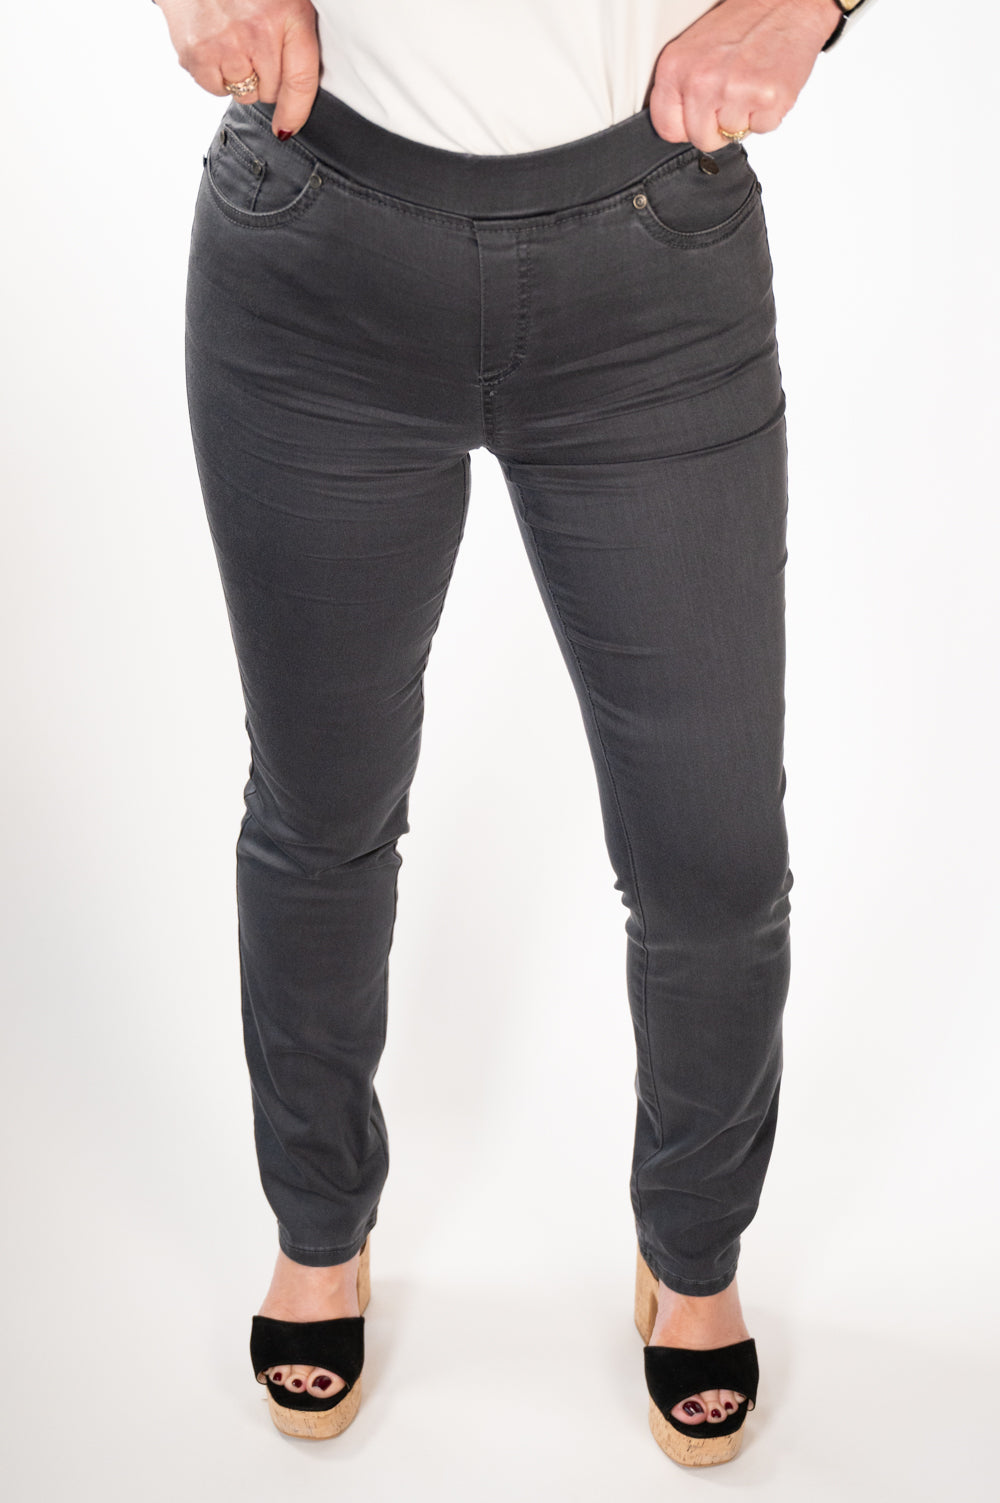 Anna Montana Jump In Jeans (1001) - Charcoal